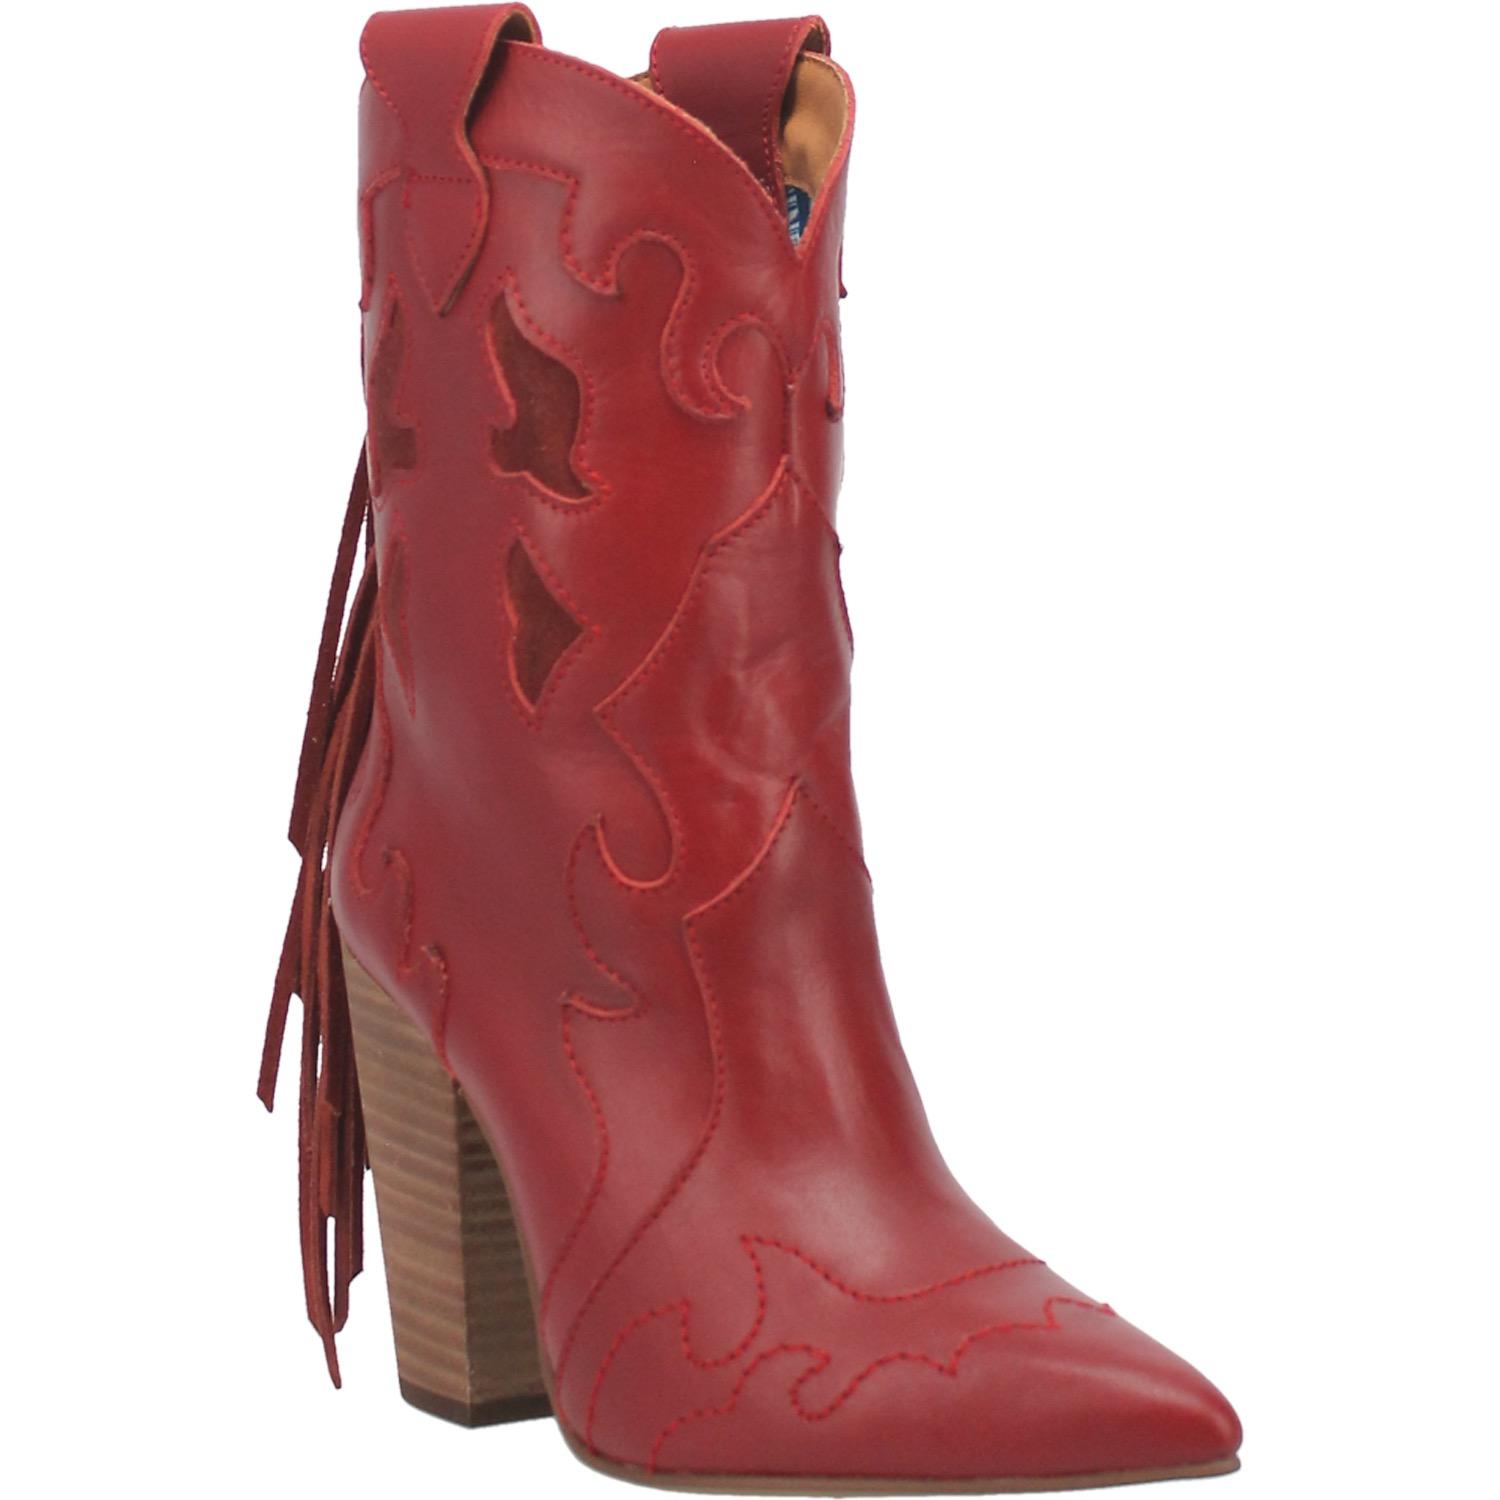 The boots shown are an ankle bootie with a rounded pointed toe made of genuine suede leather. They are red with a party fringe in the back and intricate detailing. 